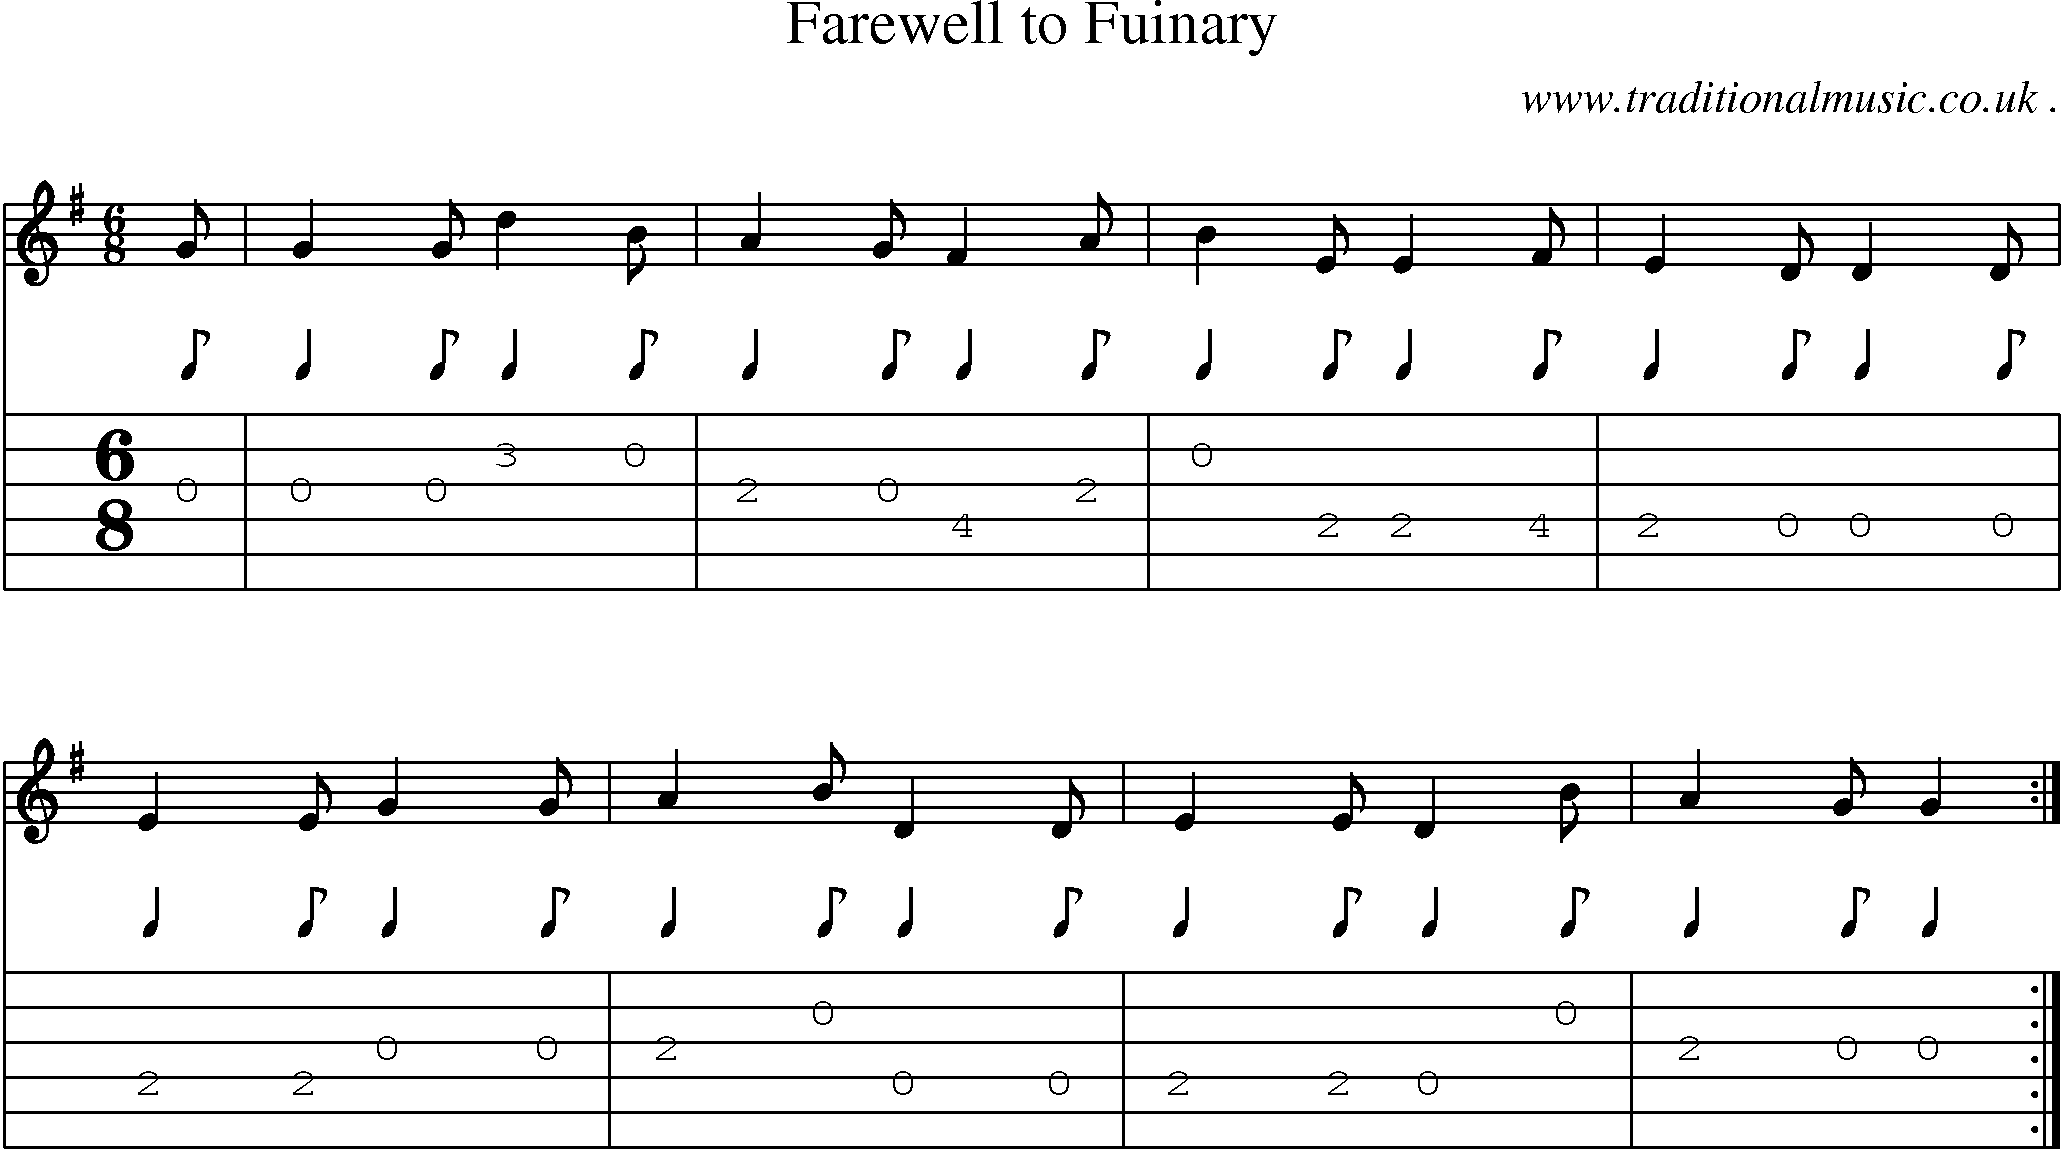 Sheet-music  score, Chords and Guitar Tabs for Farewell To Fuinary